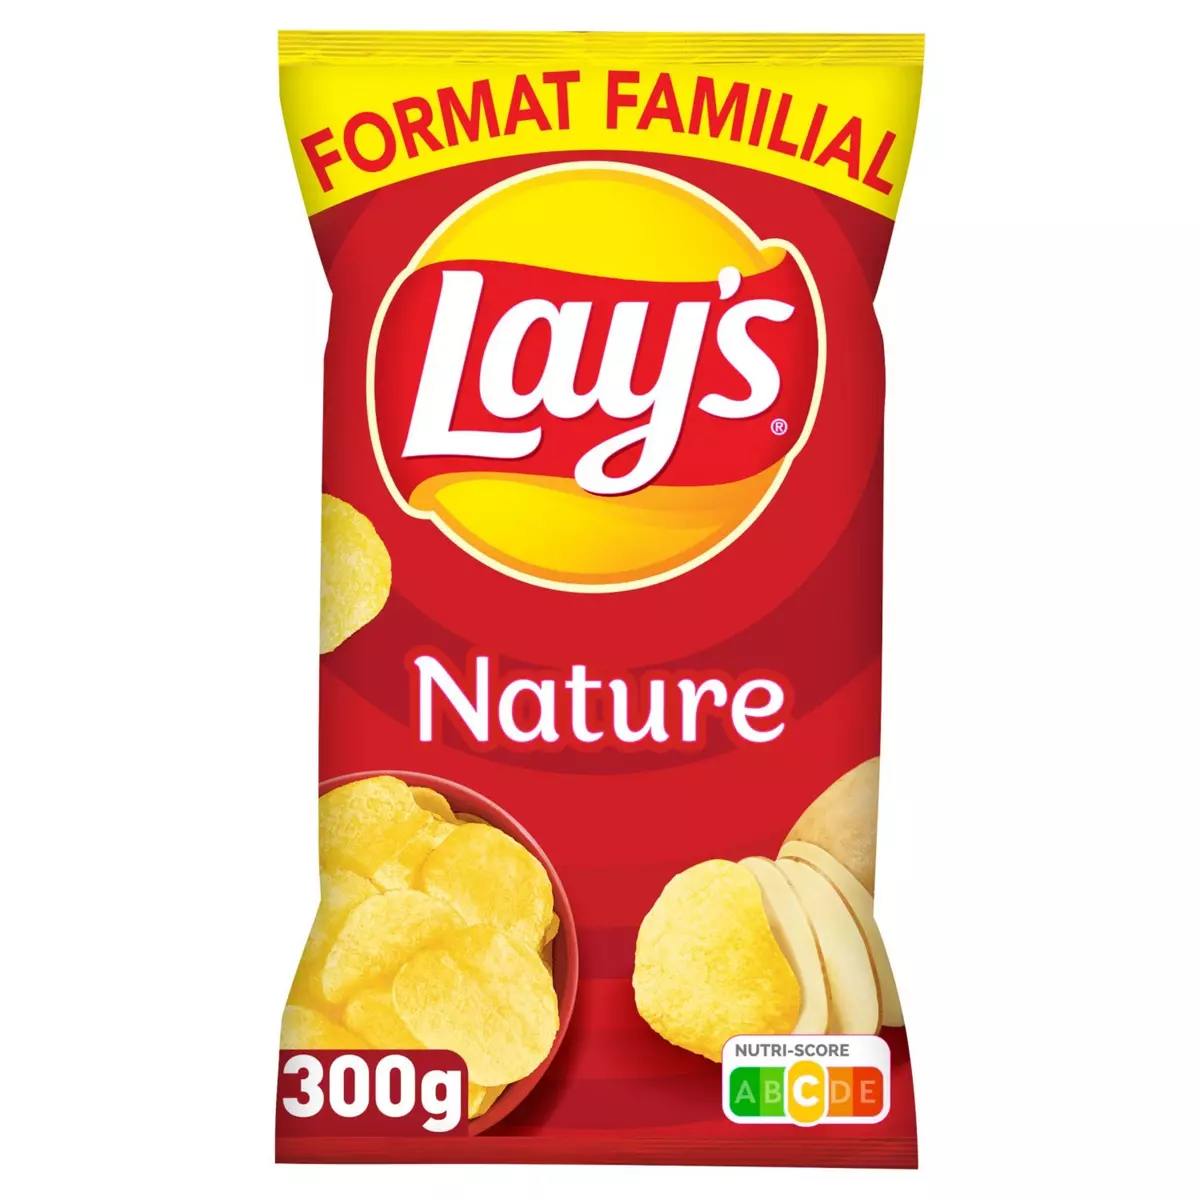 LAY'S Chips nature format familial 300g